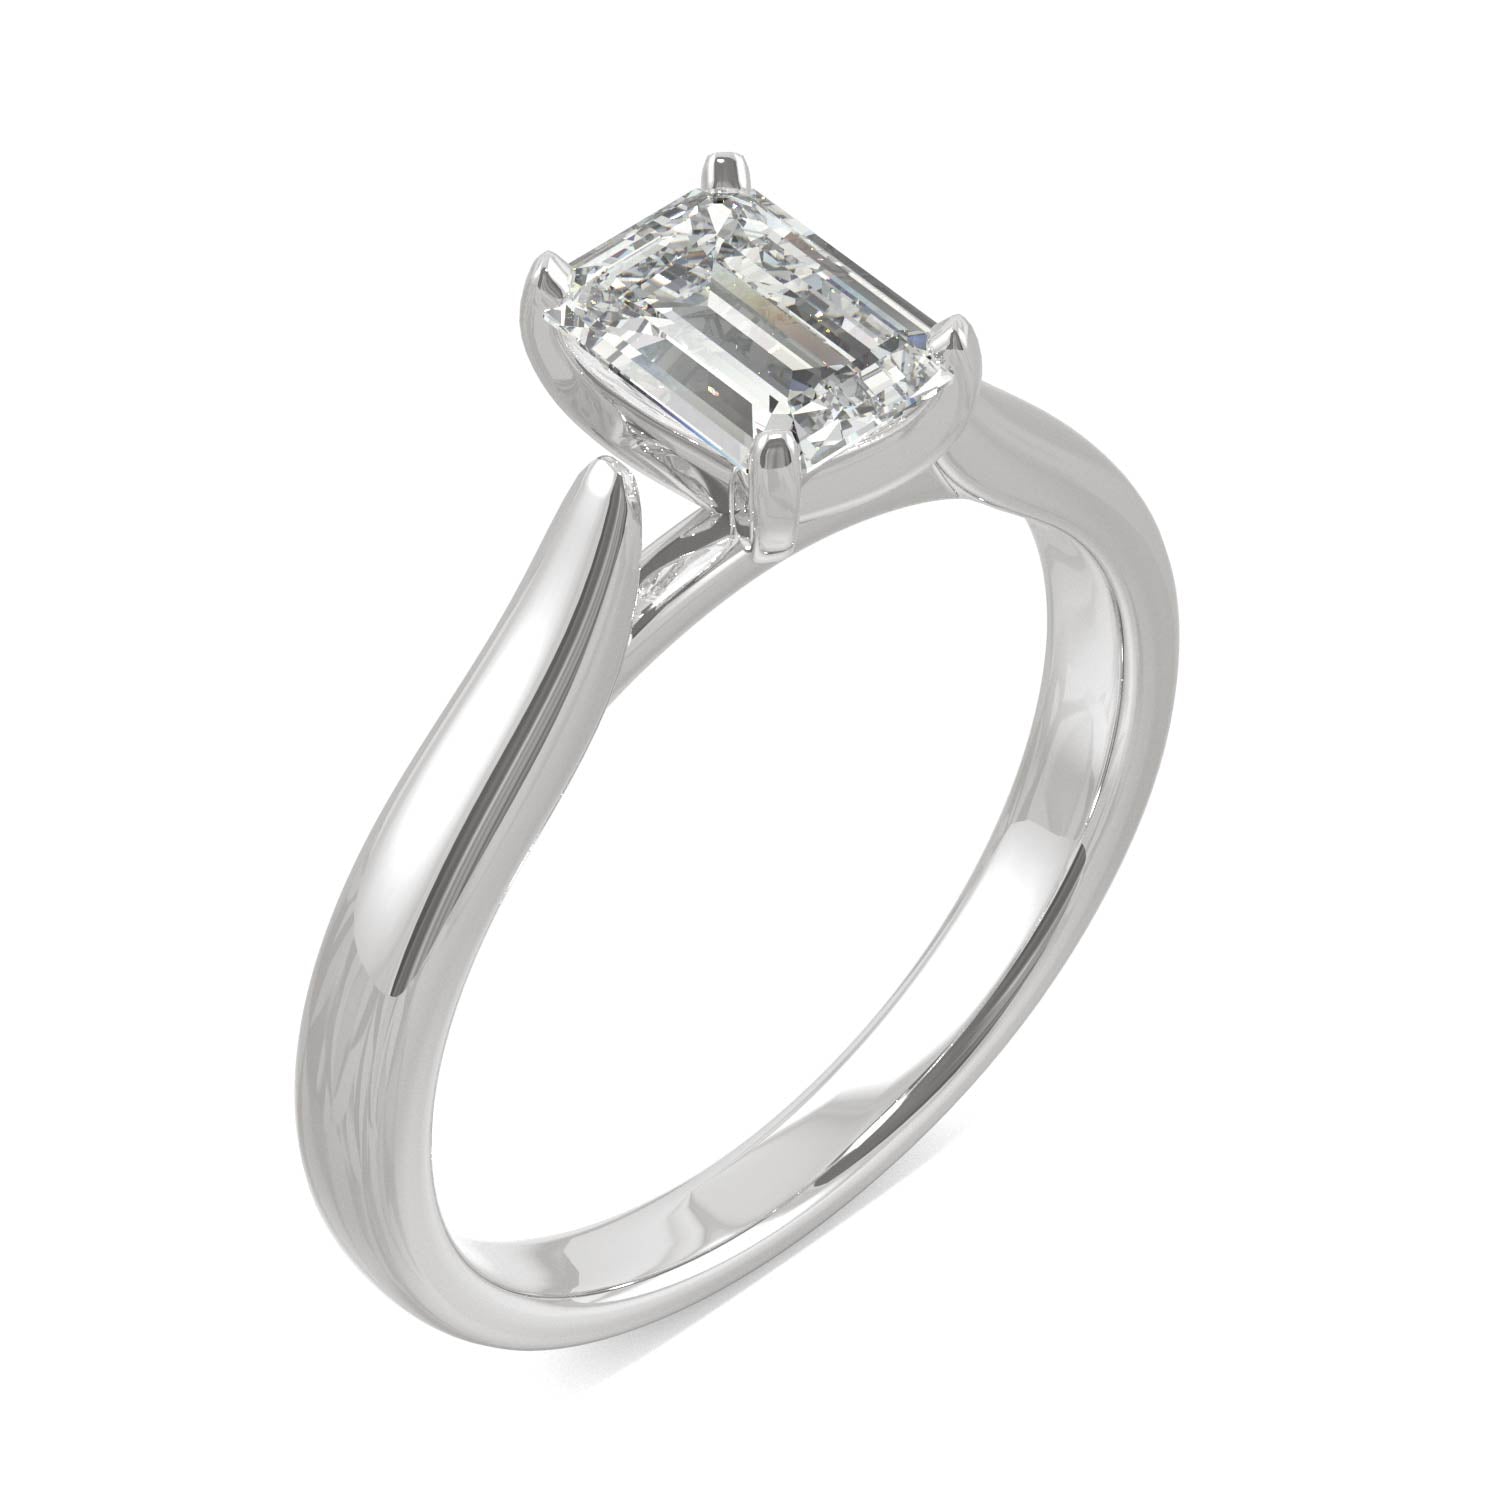 1.01 CTW DEW Emerald Moissanite Solitaire Ring in 14K White Gold